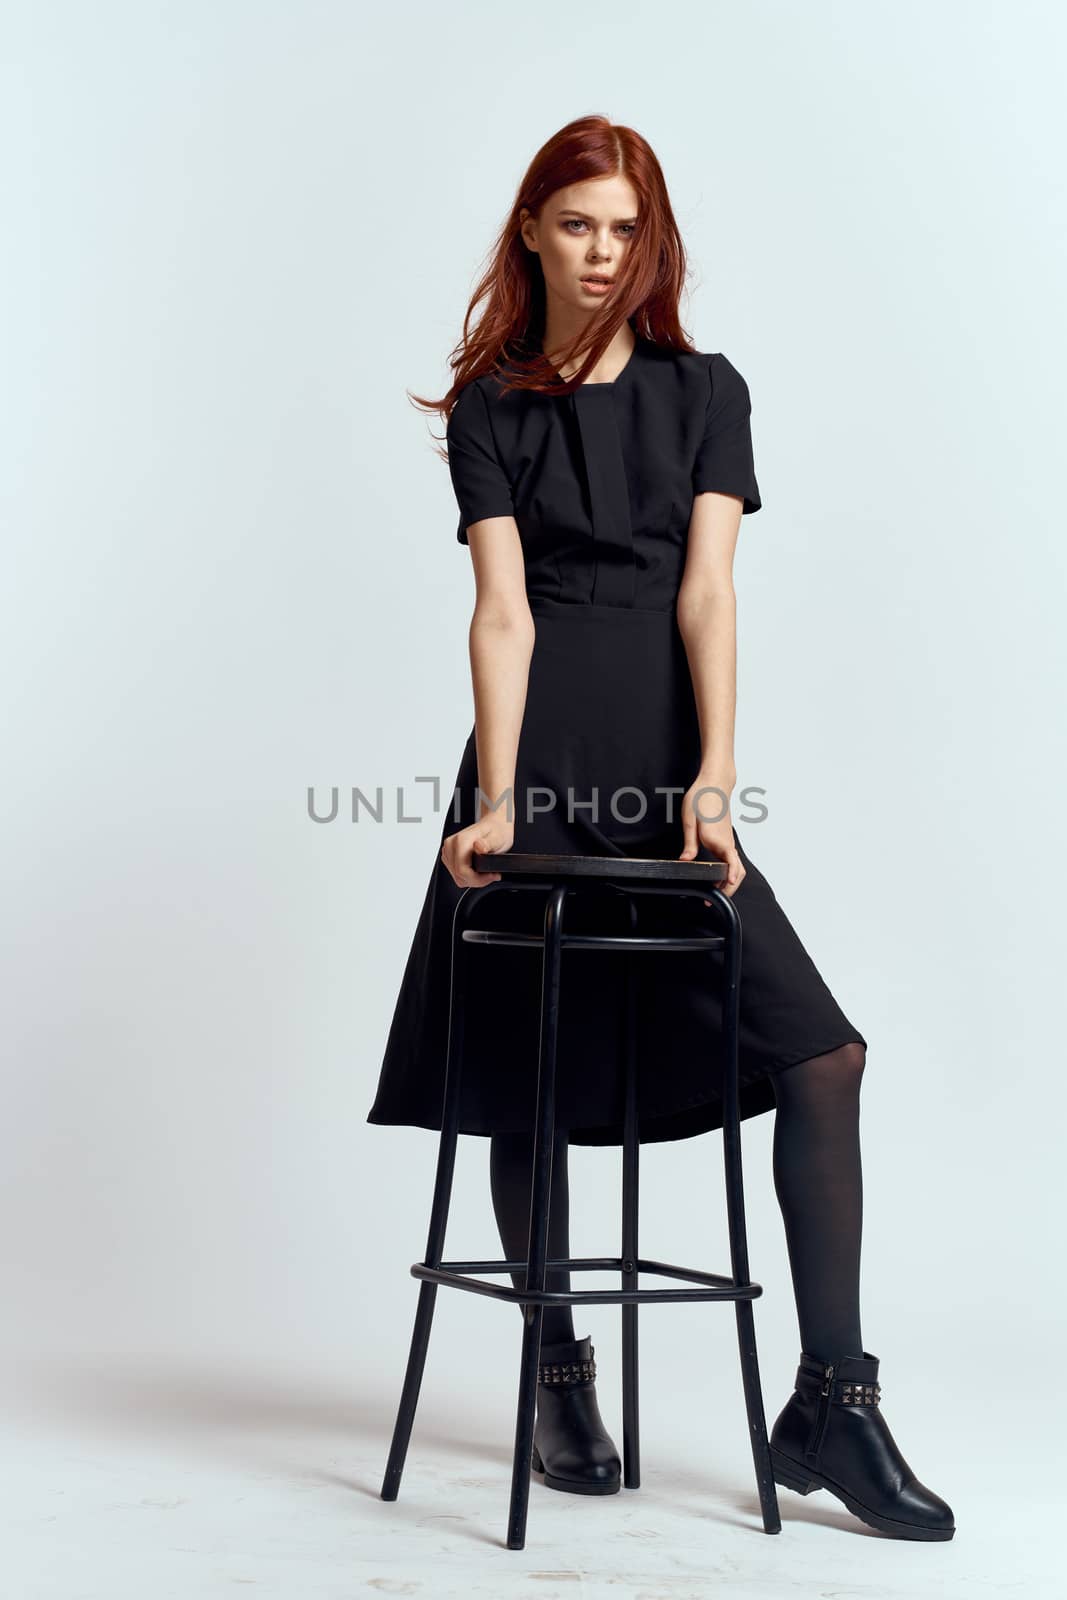 woman high chair indoors full length black dress red hair model boots. High quality photo